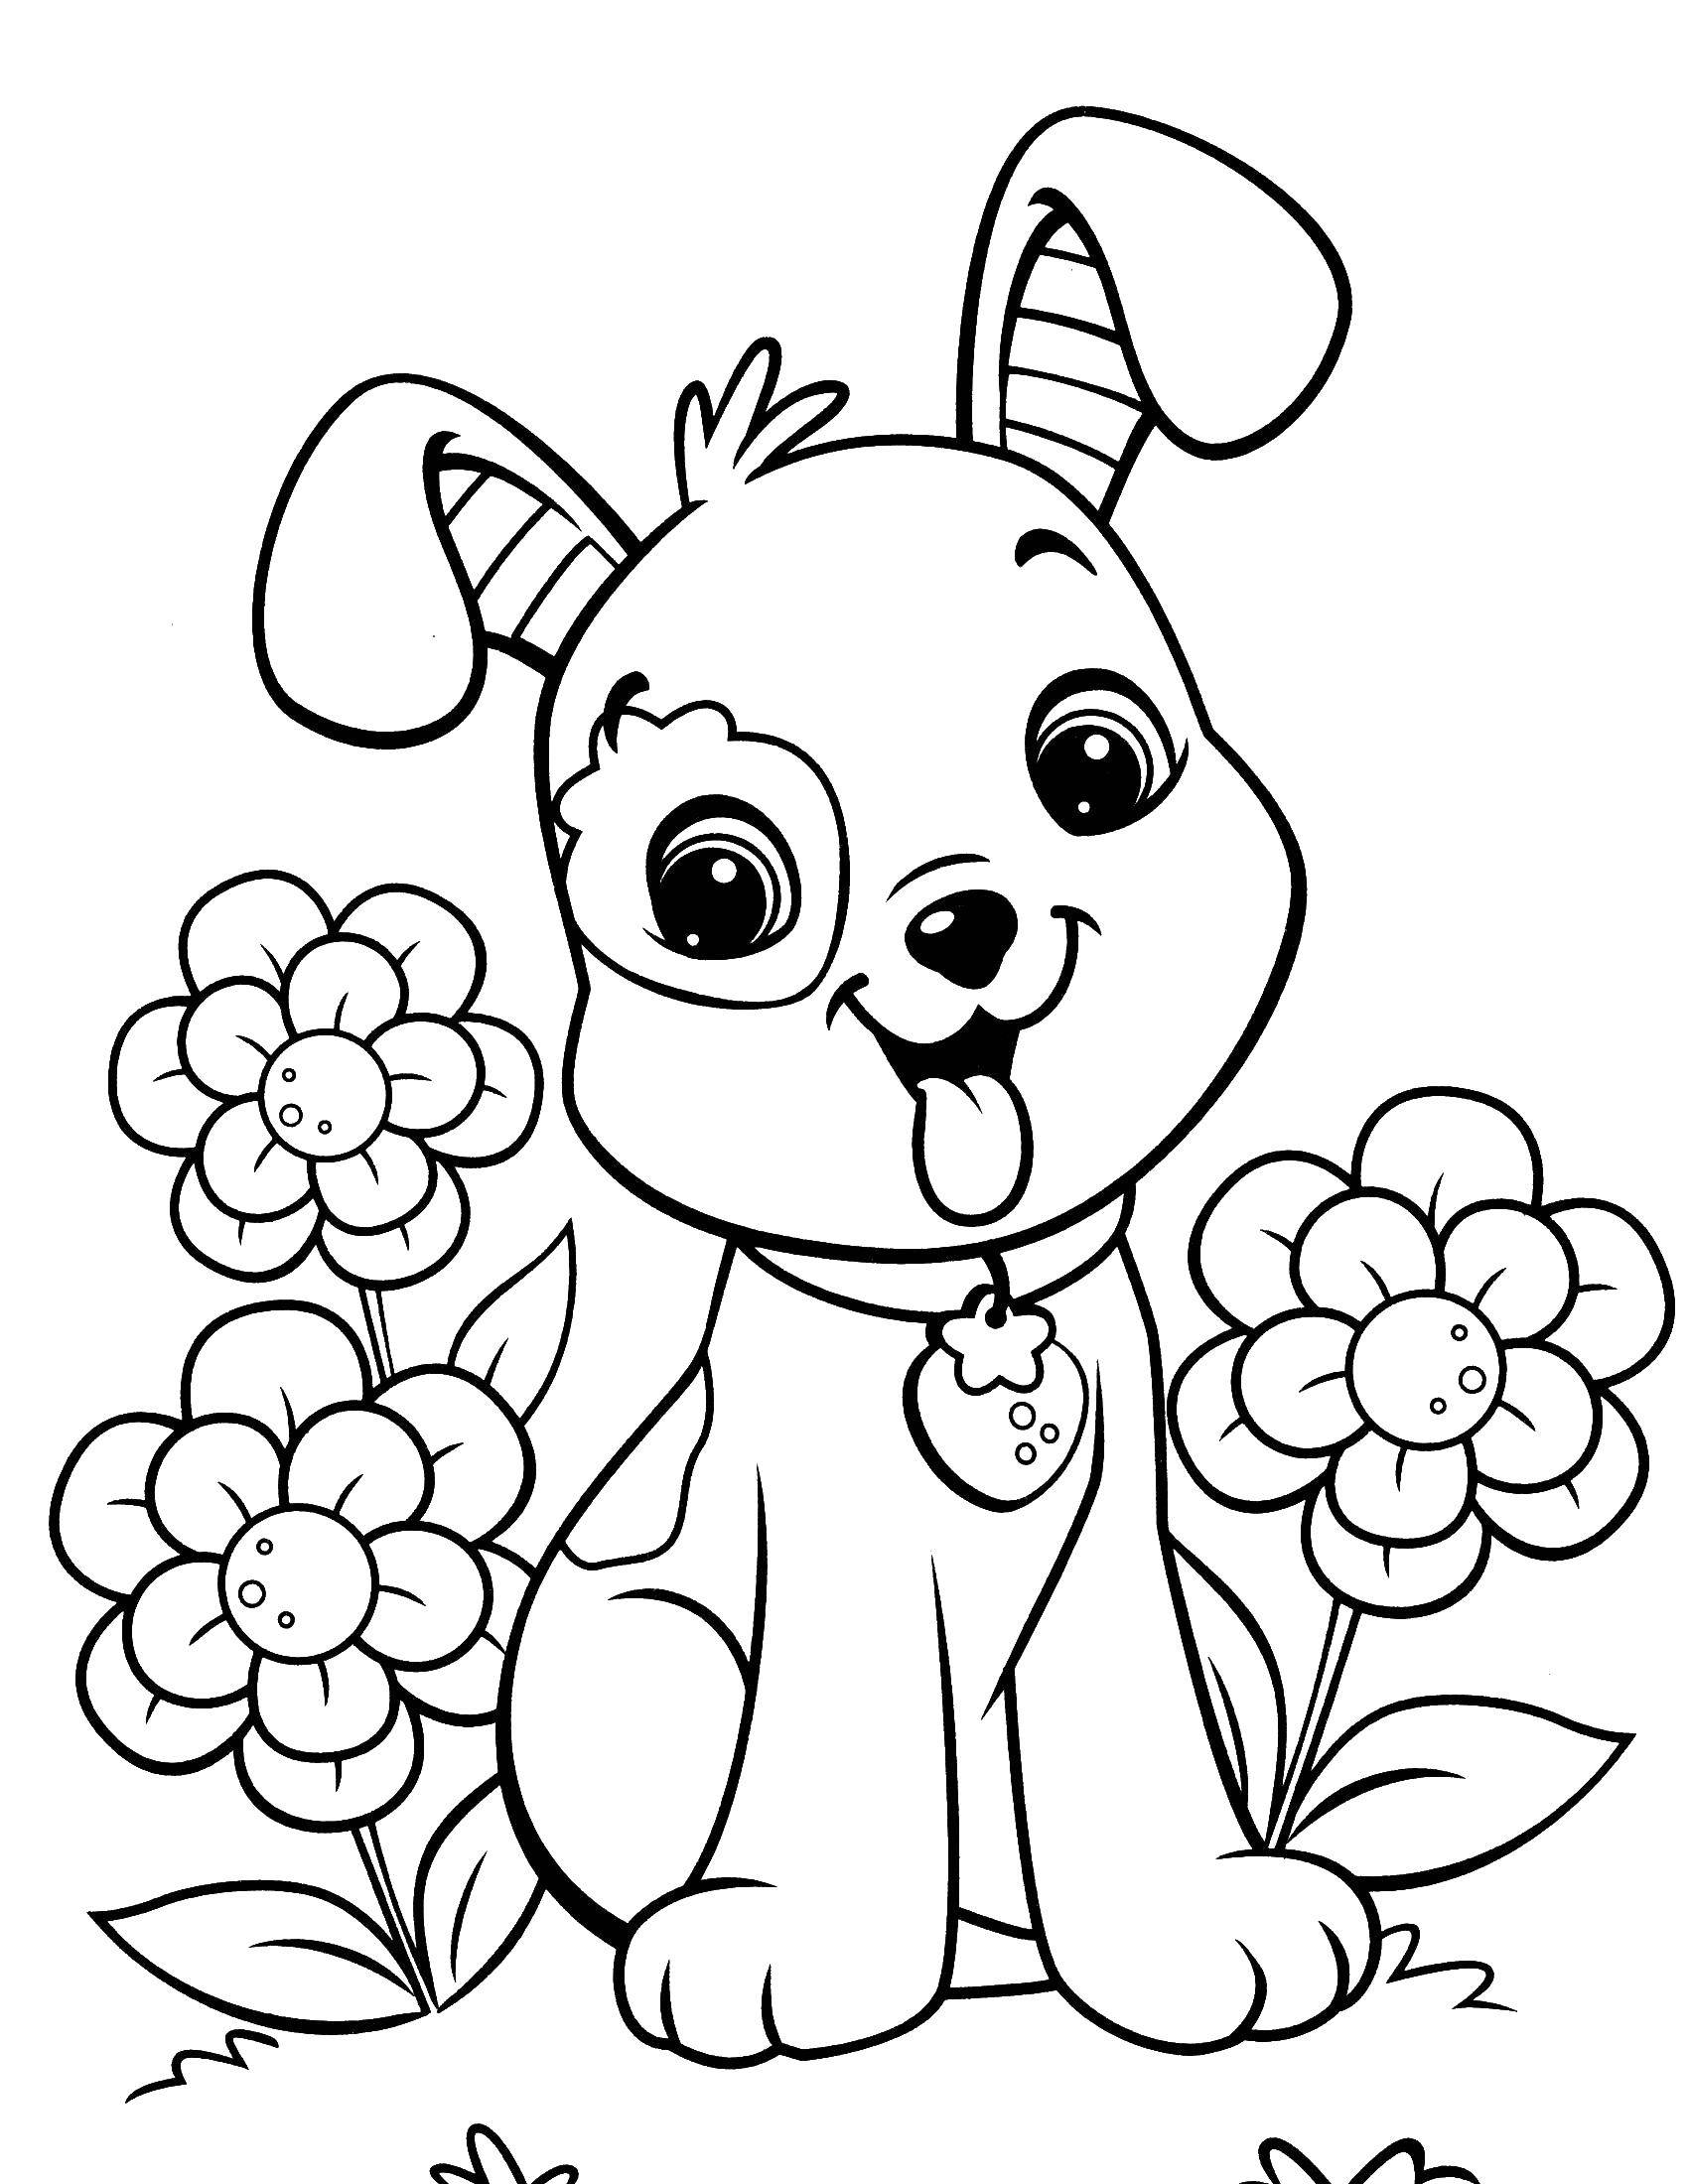 Coloring Dog. Category Animals. Tags:  animals, dog, puppy, flowers.